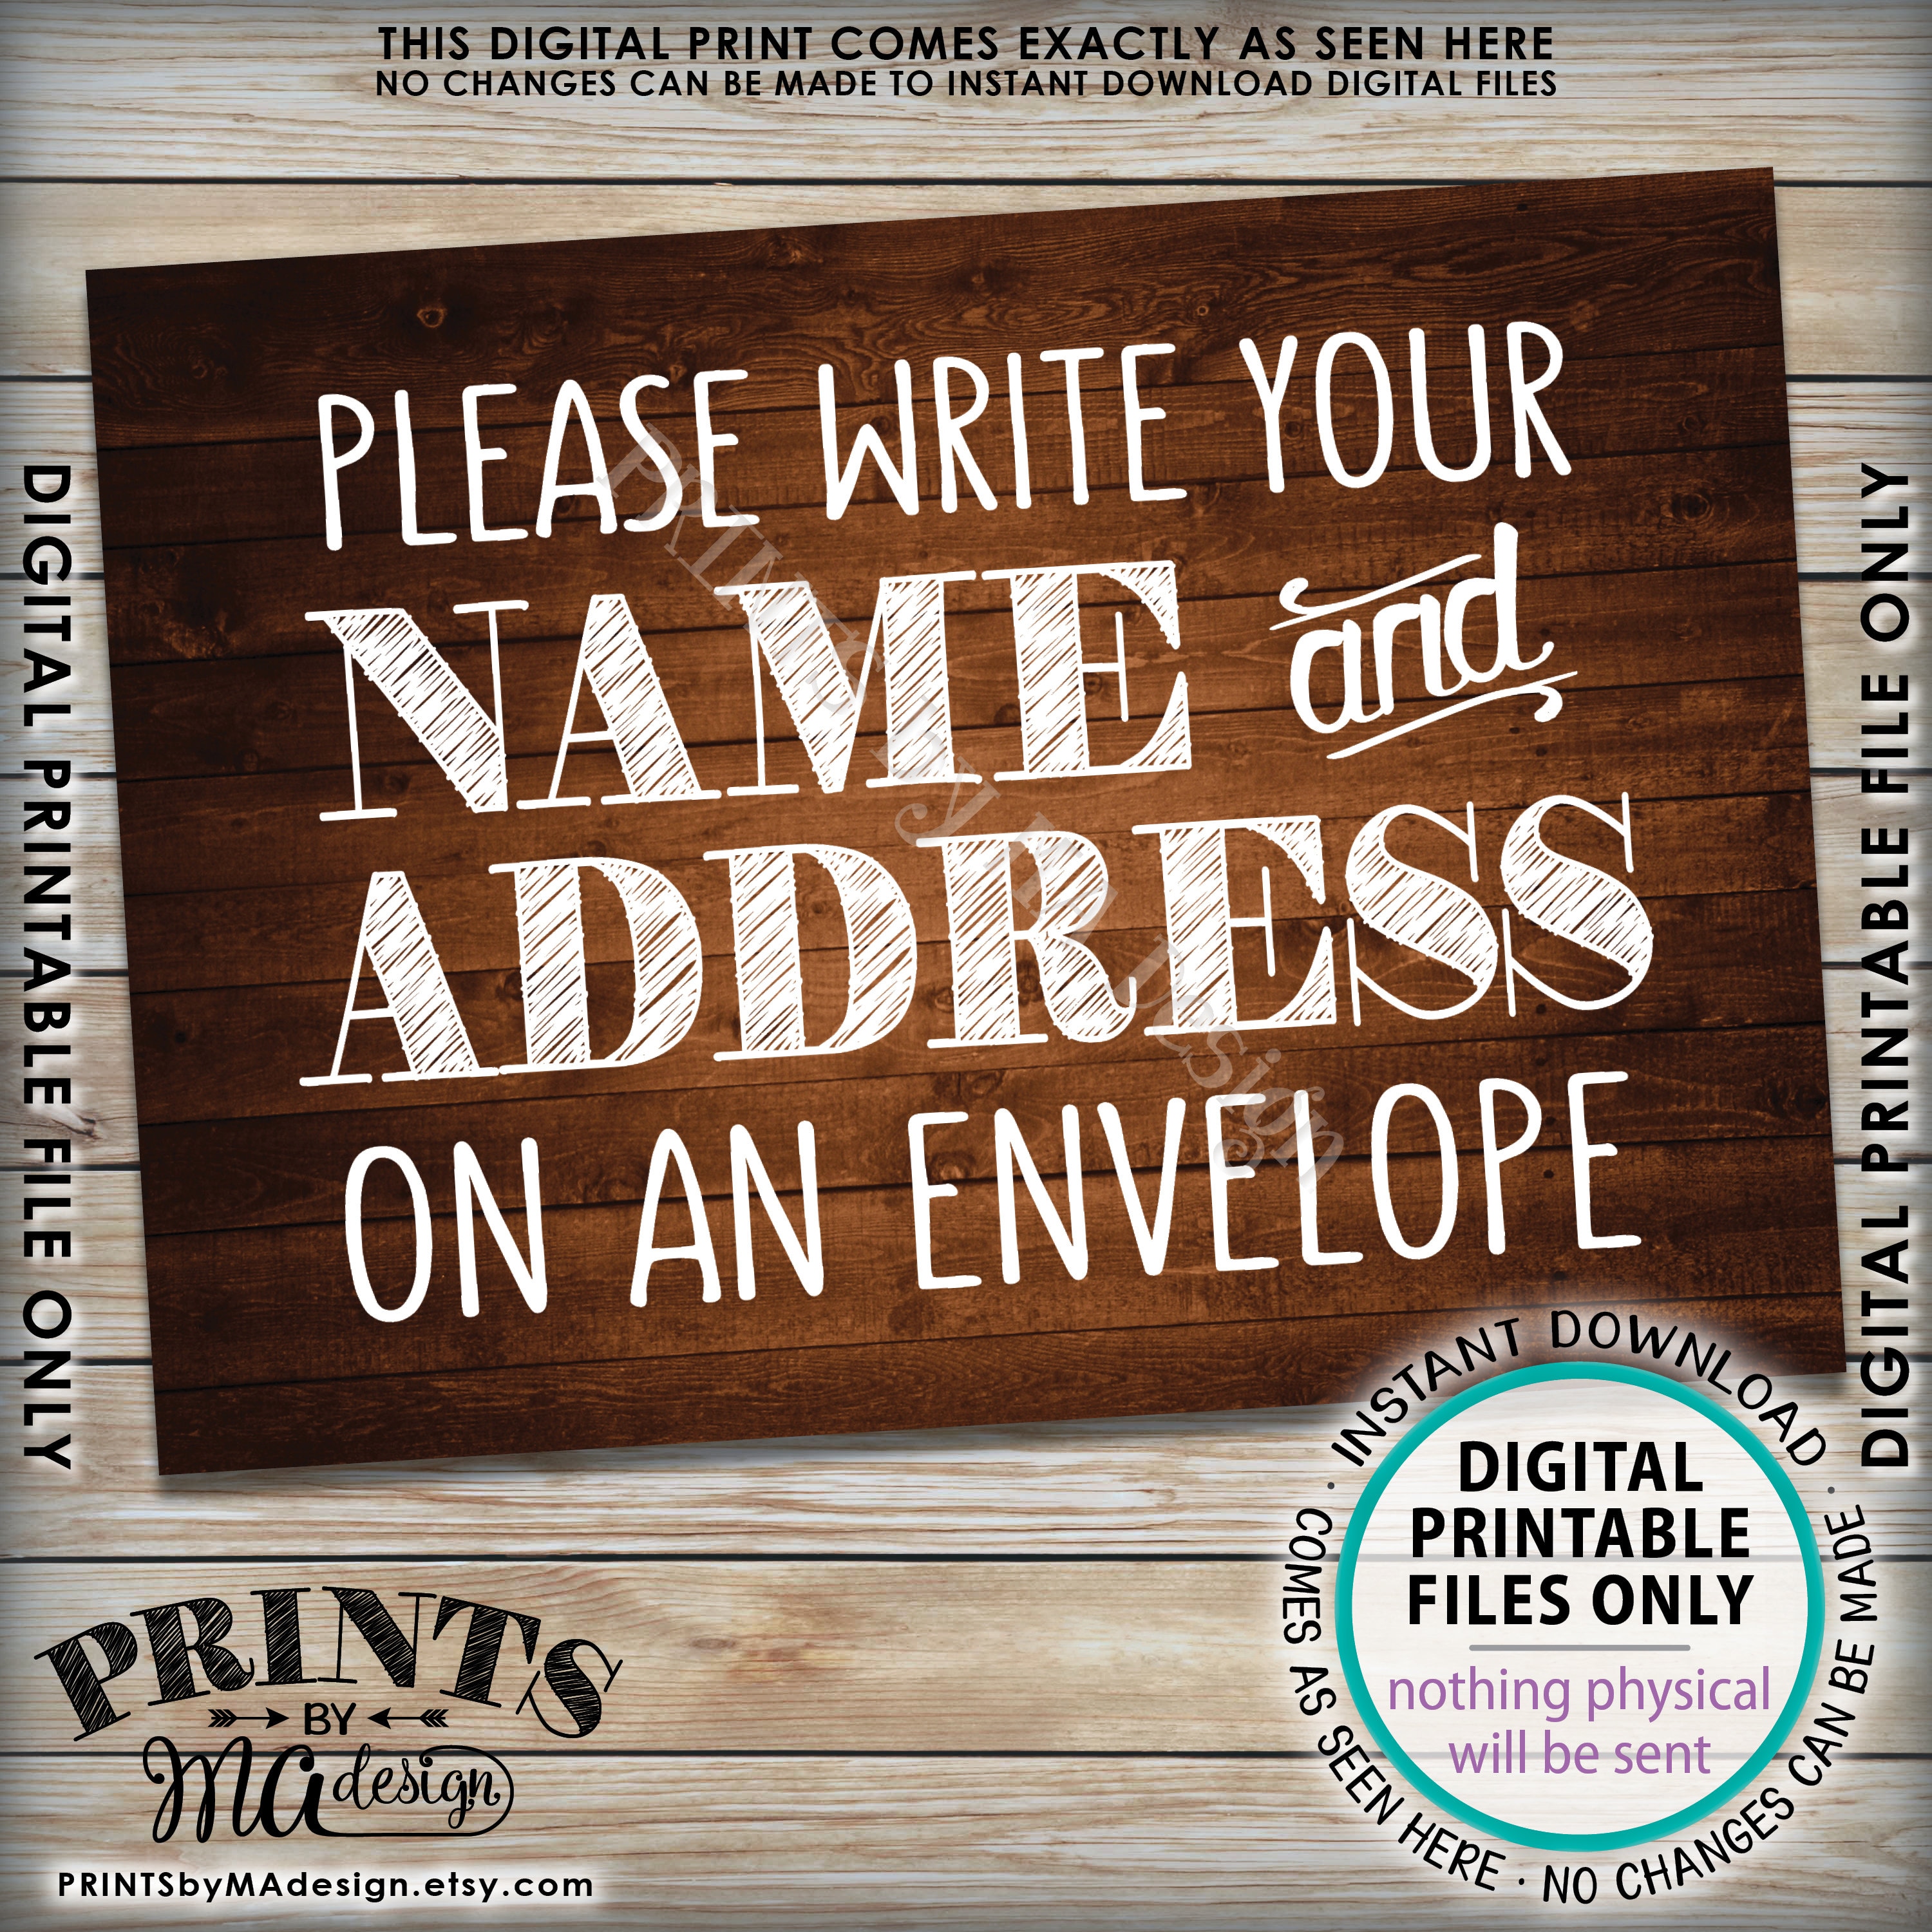 address-an-envelope-sign-make-yourself-the-addressee-printable-5x7